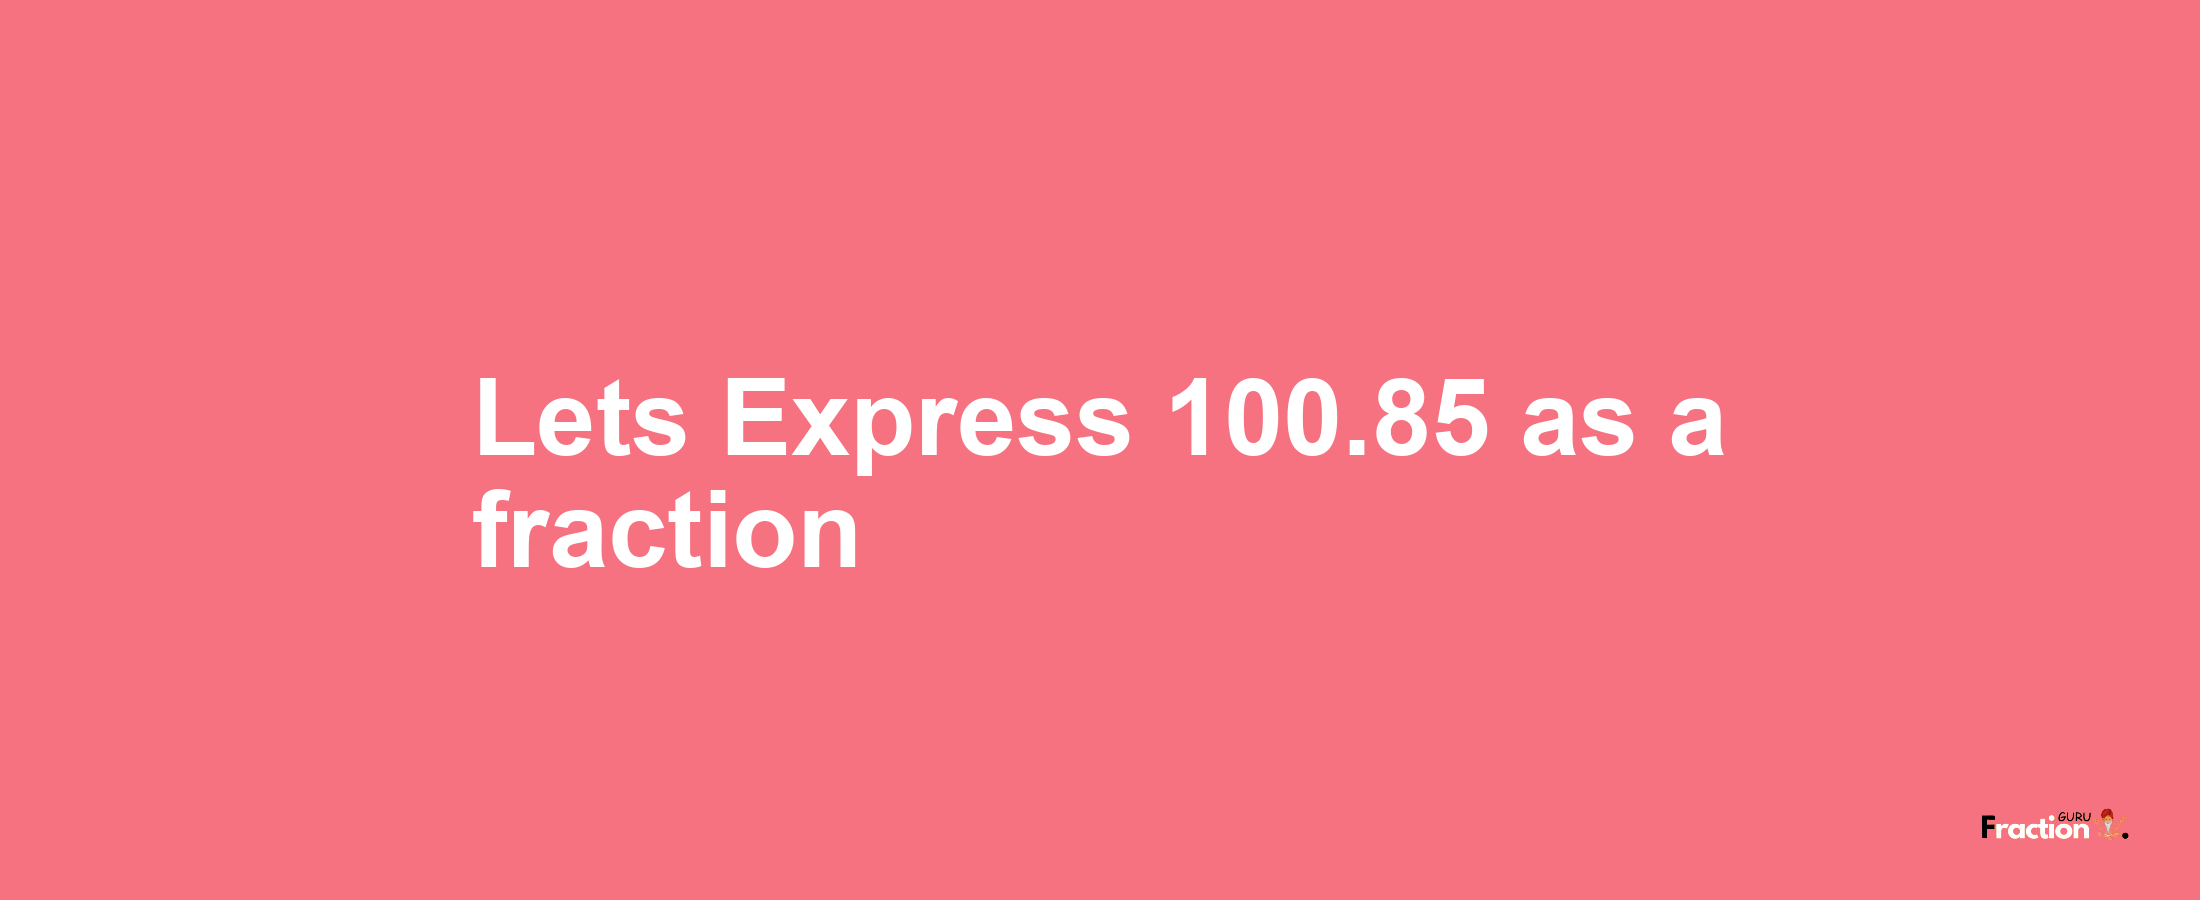 Lets Express 100.85 as afraction